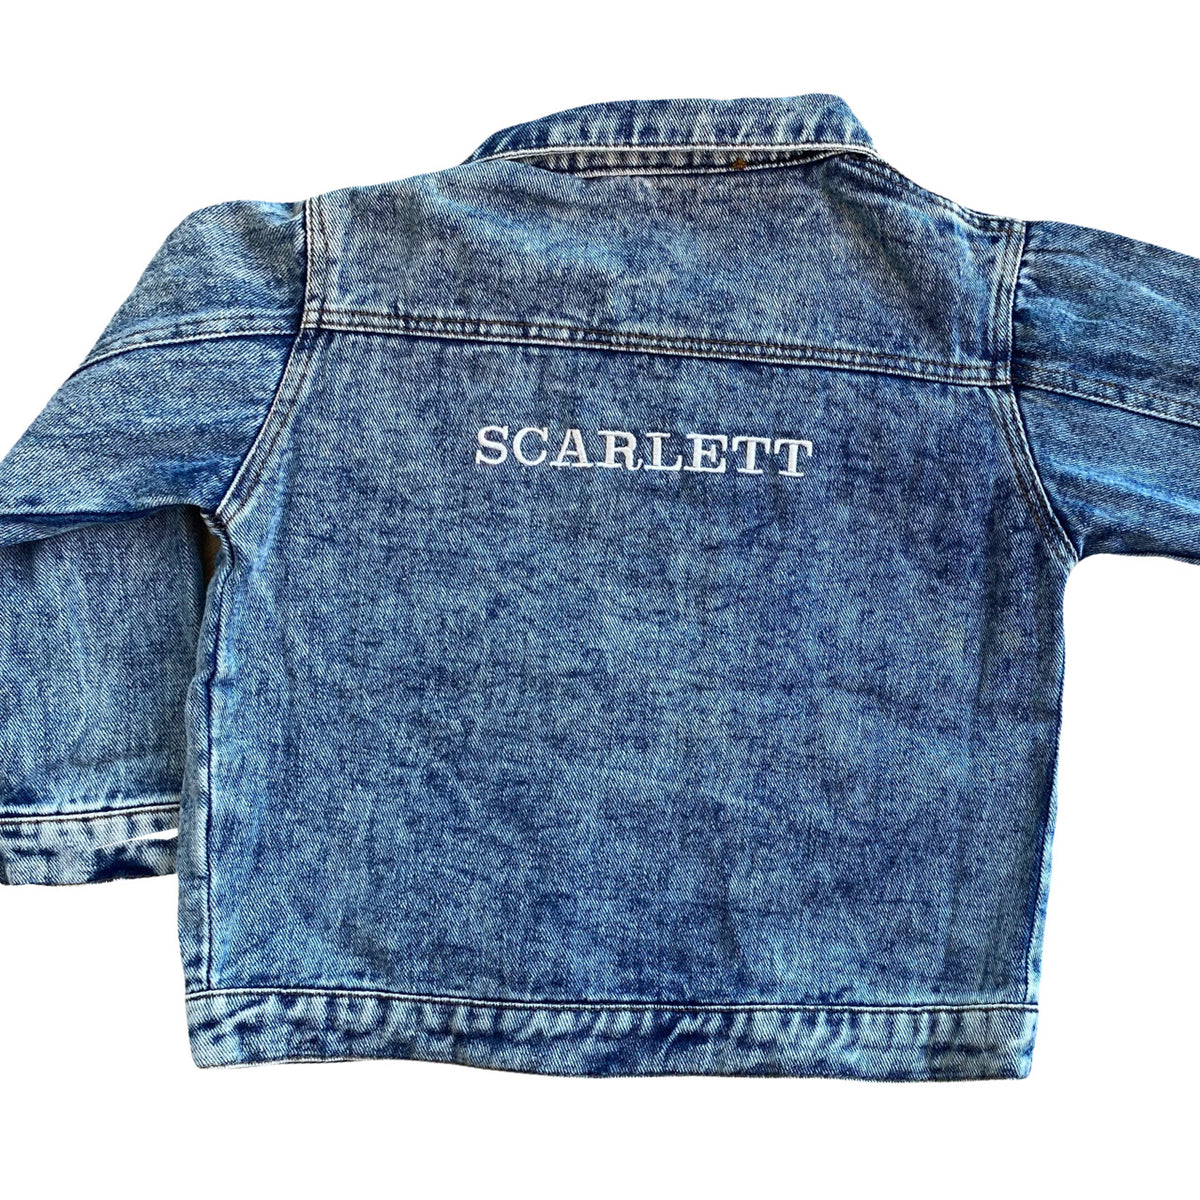 MLW By Design - Personalised Embroidered Denim Jacket *LIMITED EDITION*